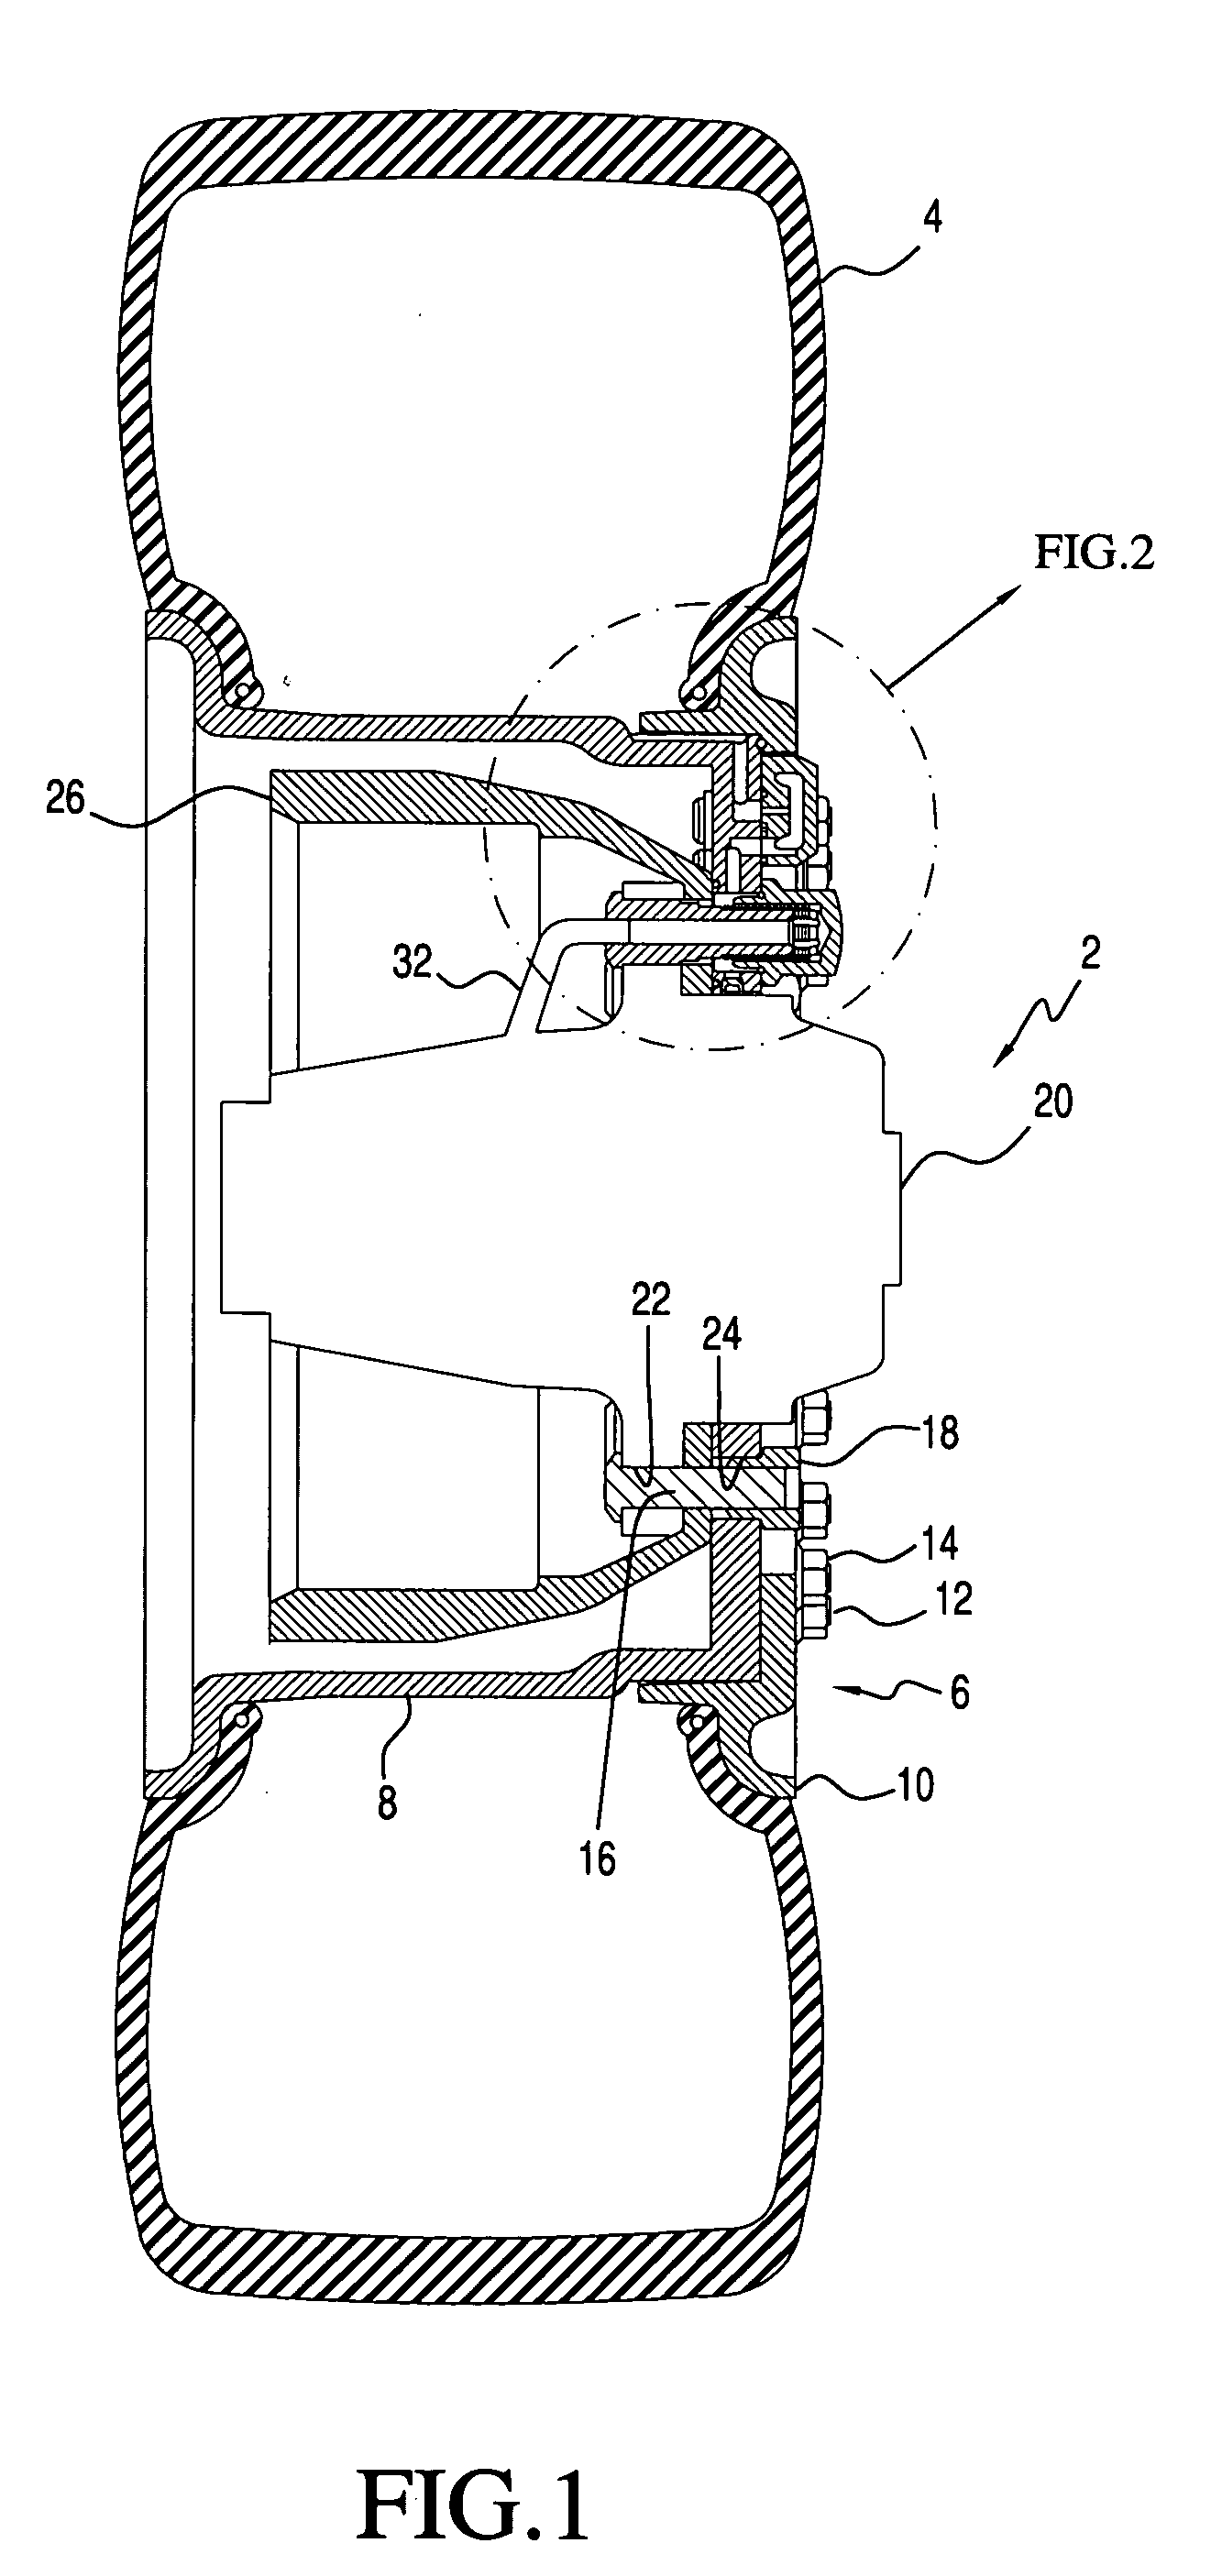 Vehicle wheel assembly with a hollow stud and internal passageways connected to a CTIS